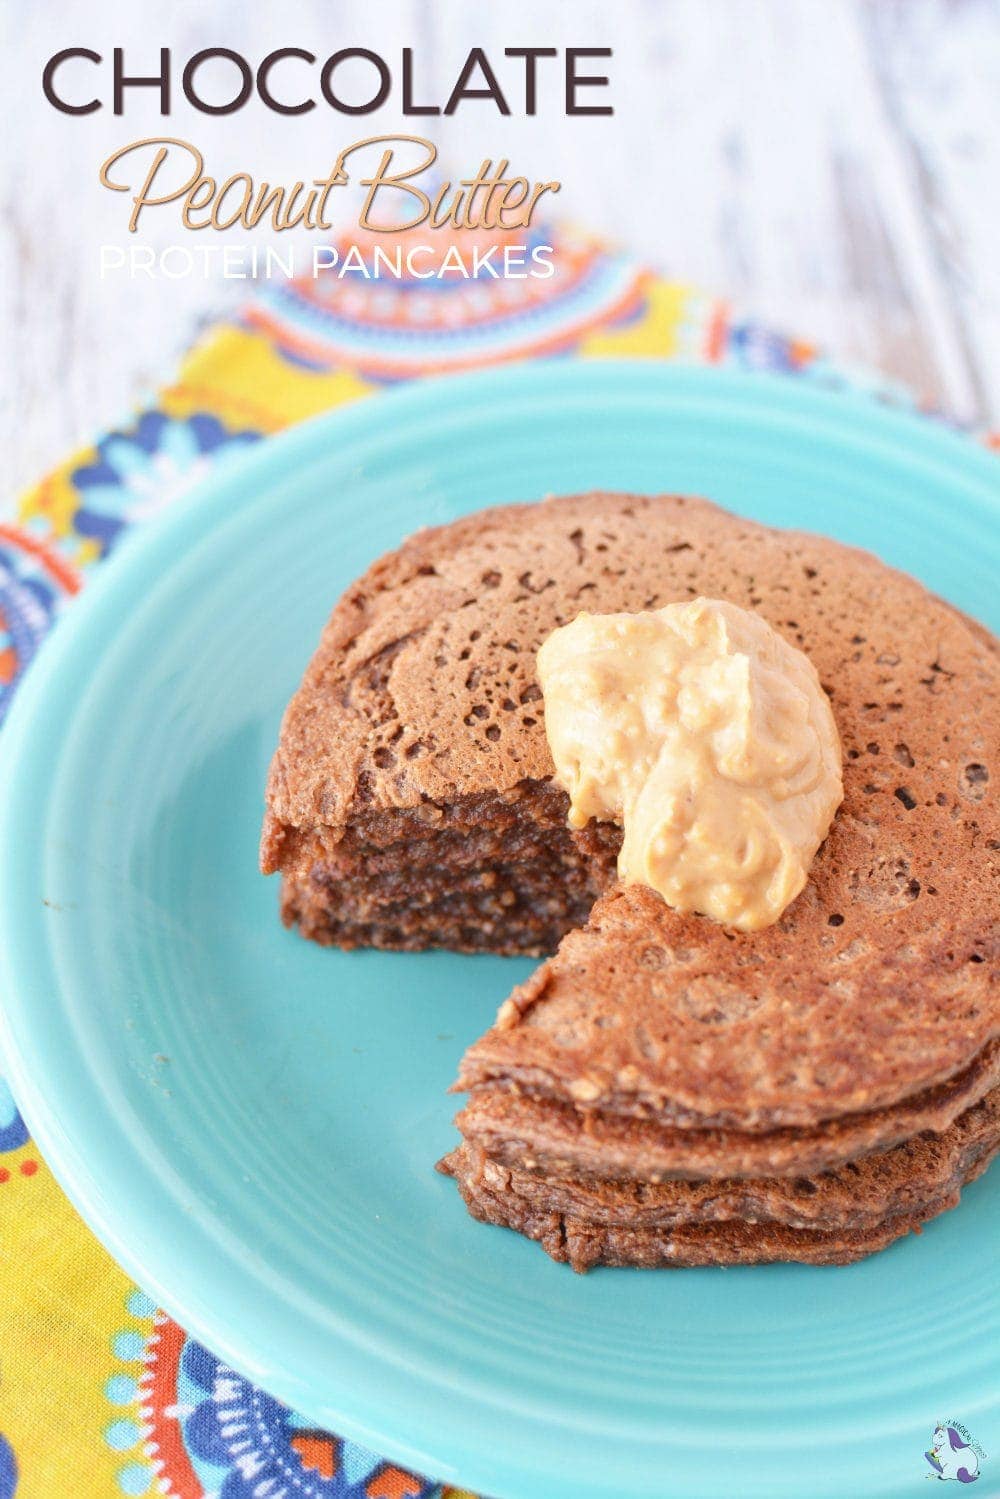 Chocolate Peanut Butter pancakes made with protein powder